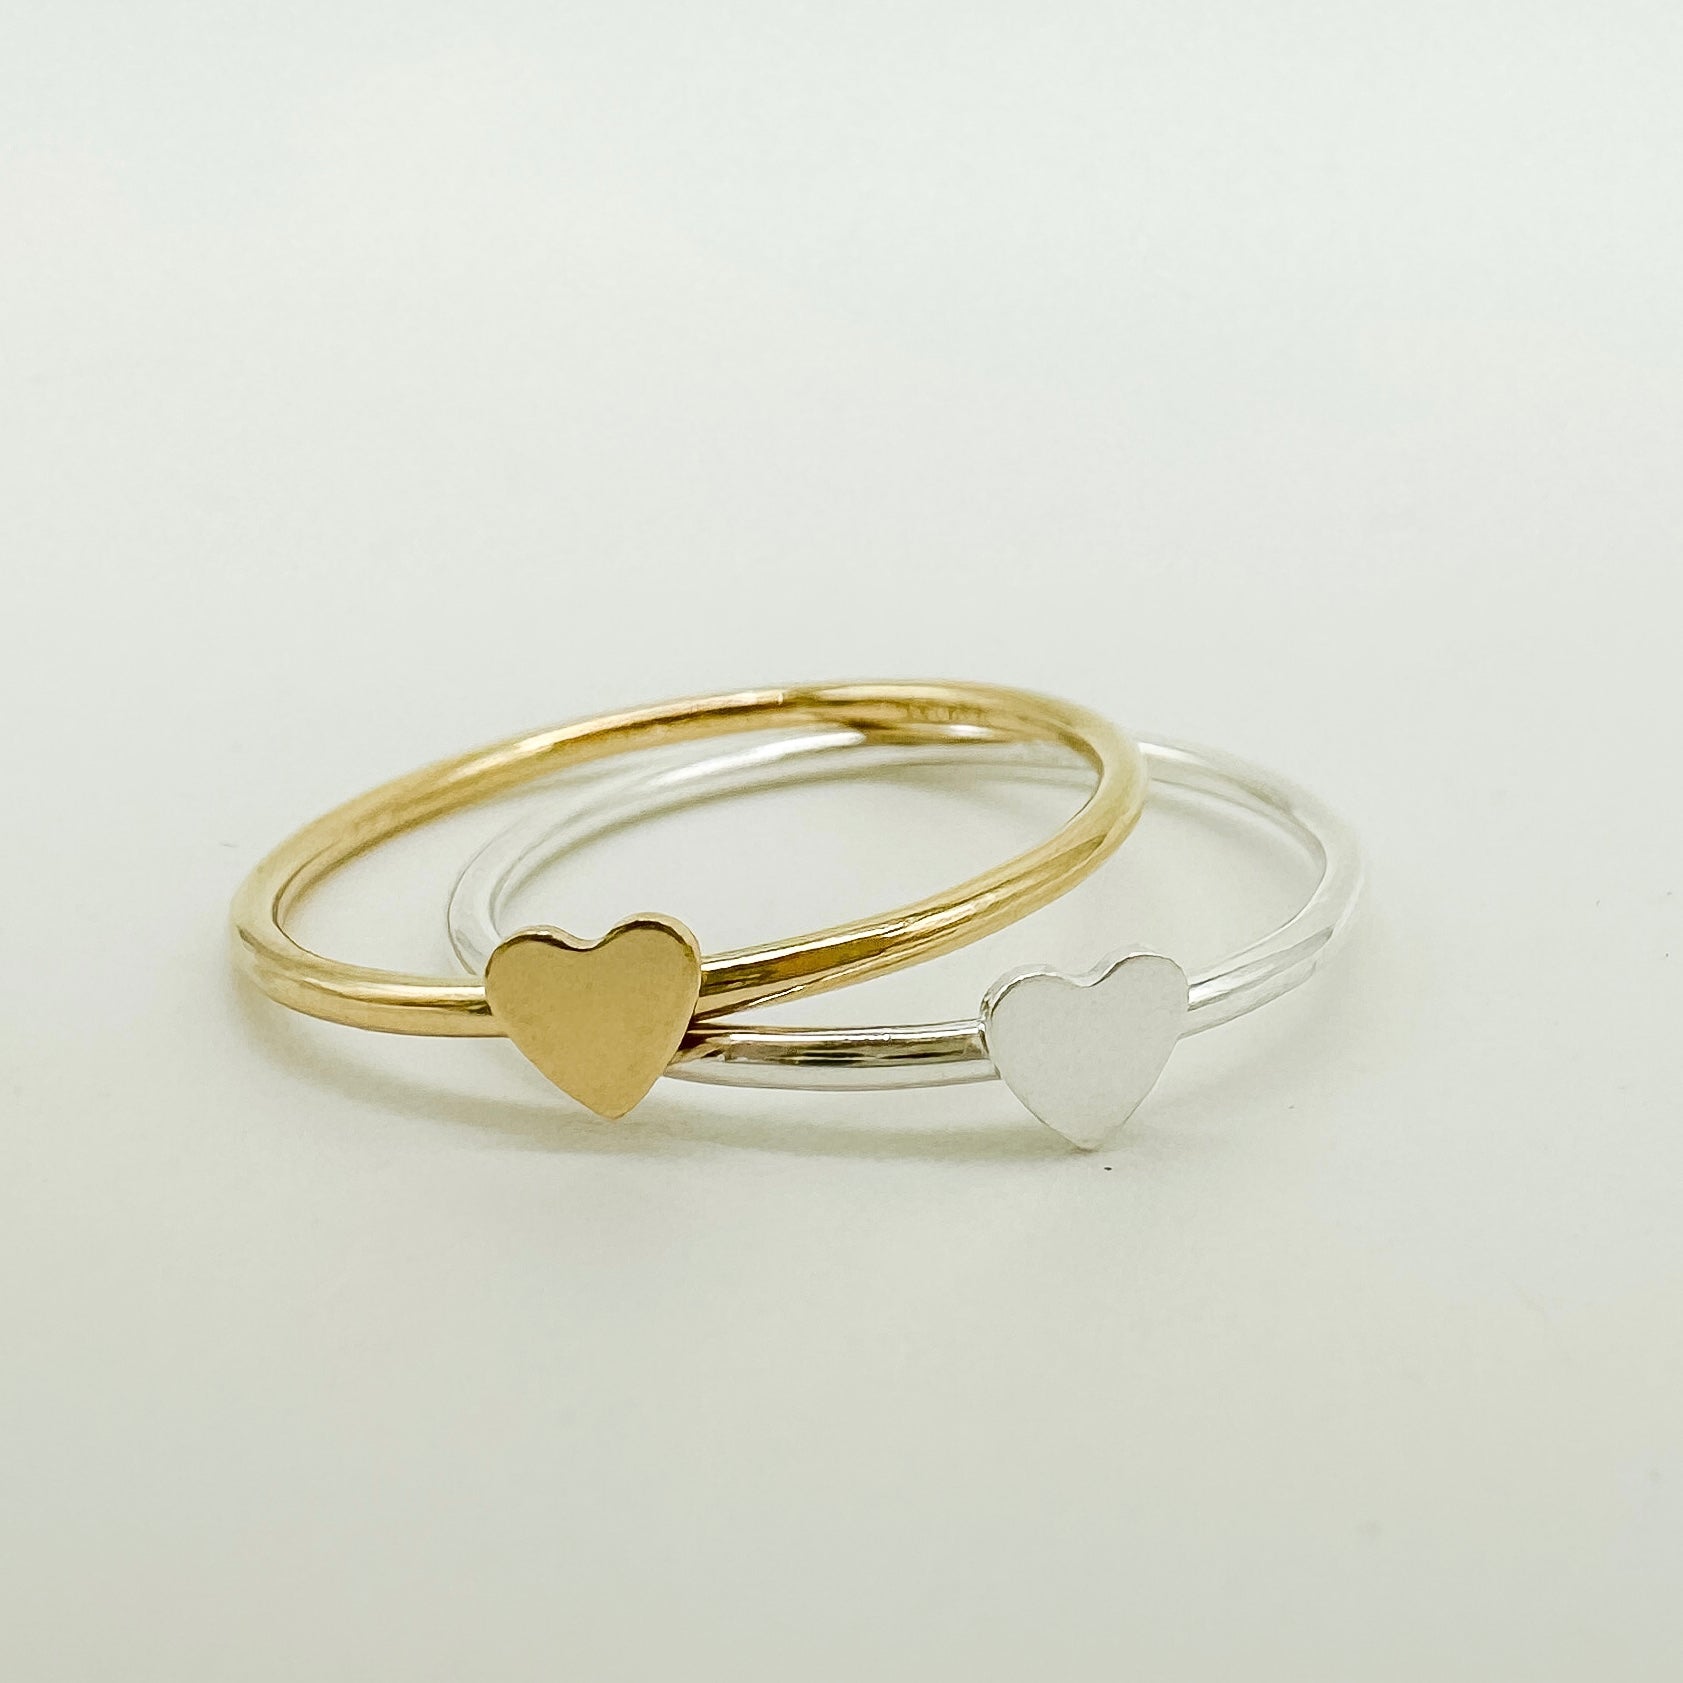 essbe jewelry supply, stacking ring, gold filled ring, heart stacking ring, heart ring, wholesale rings